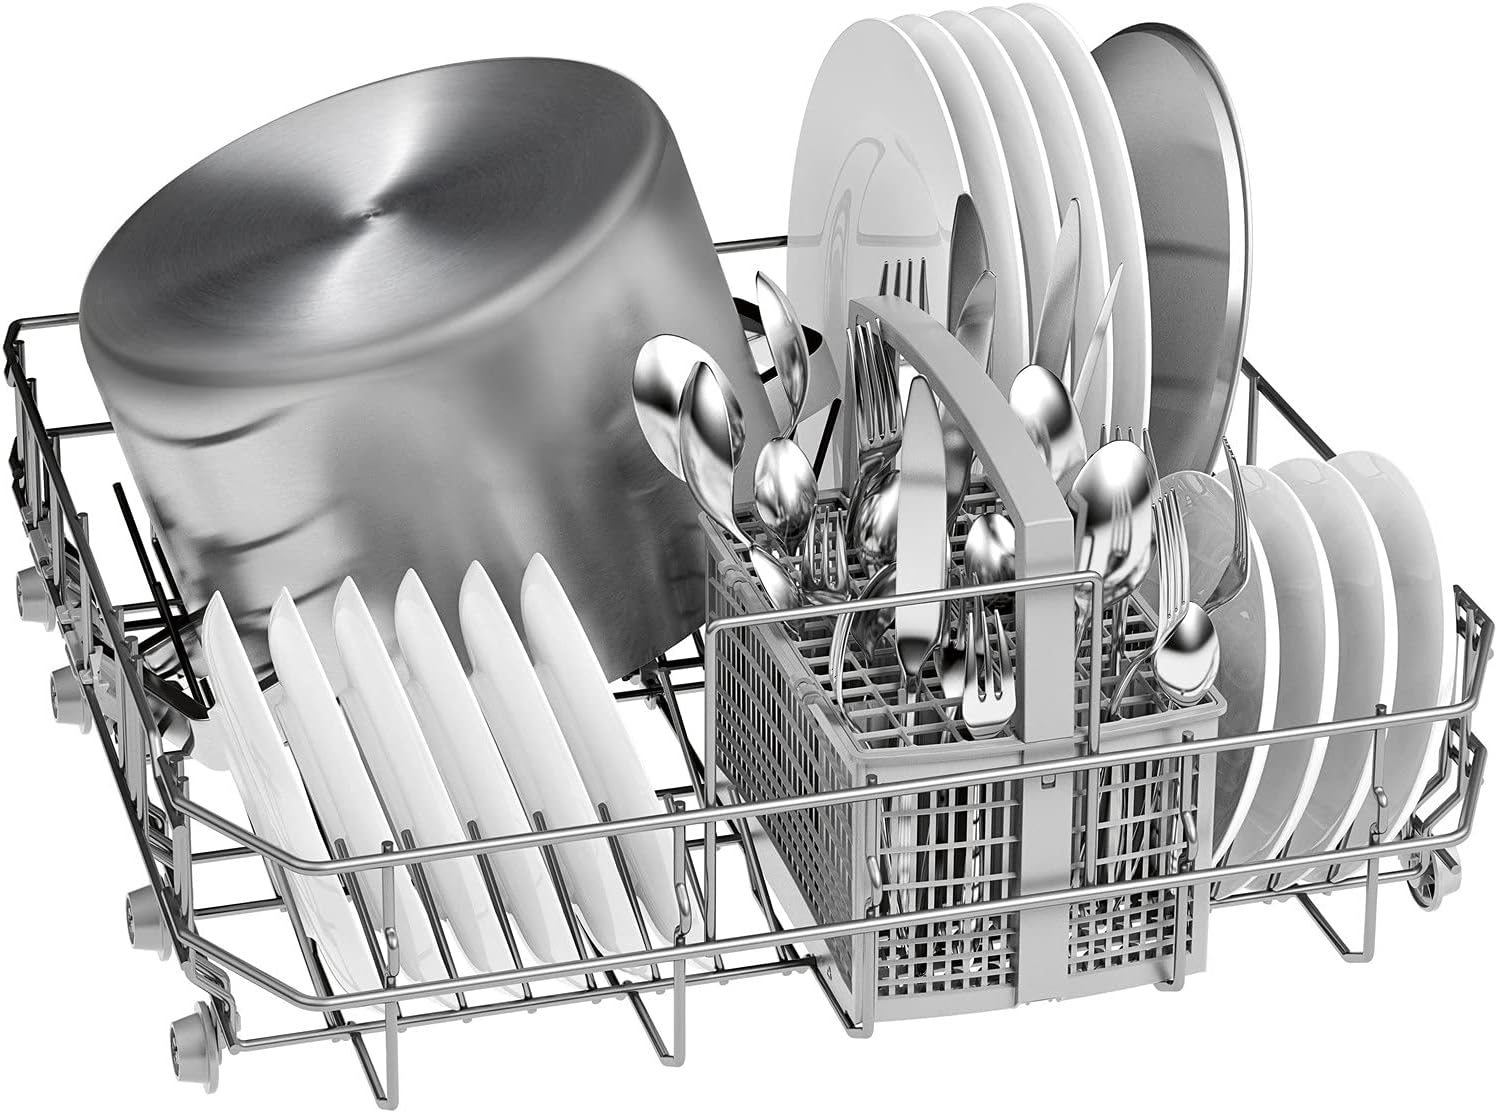 Serie 2 Integrated Dishwasher - Stainless Steel - Amazing Gadgets Outlet